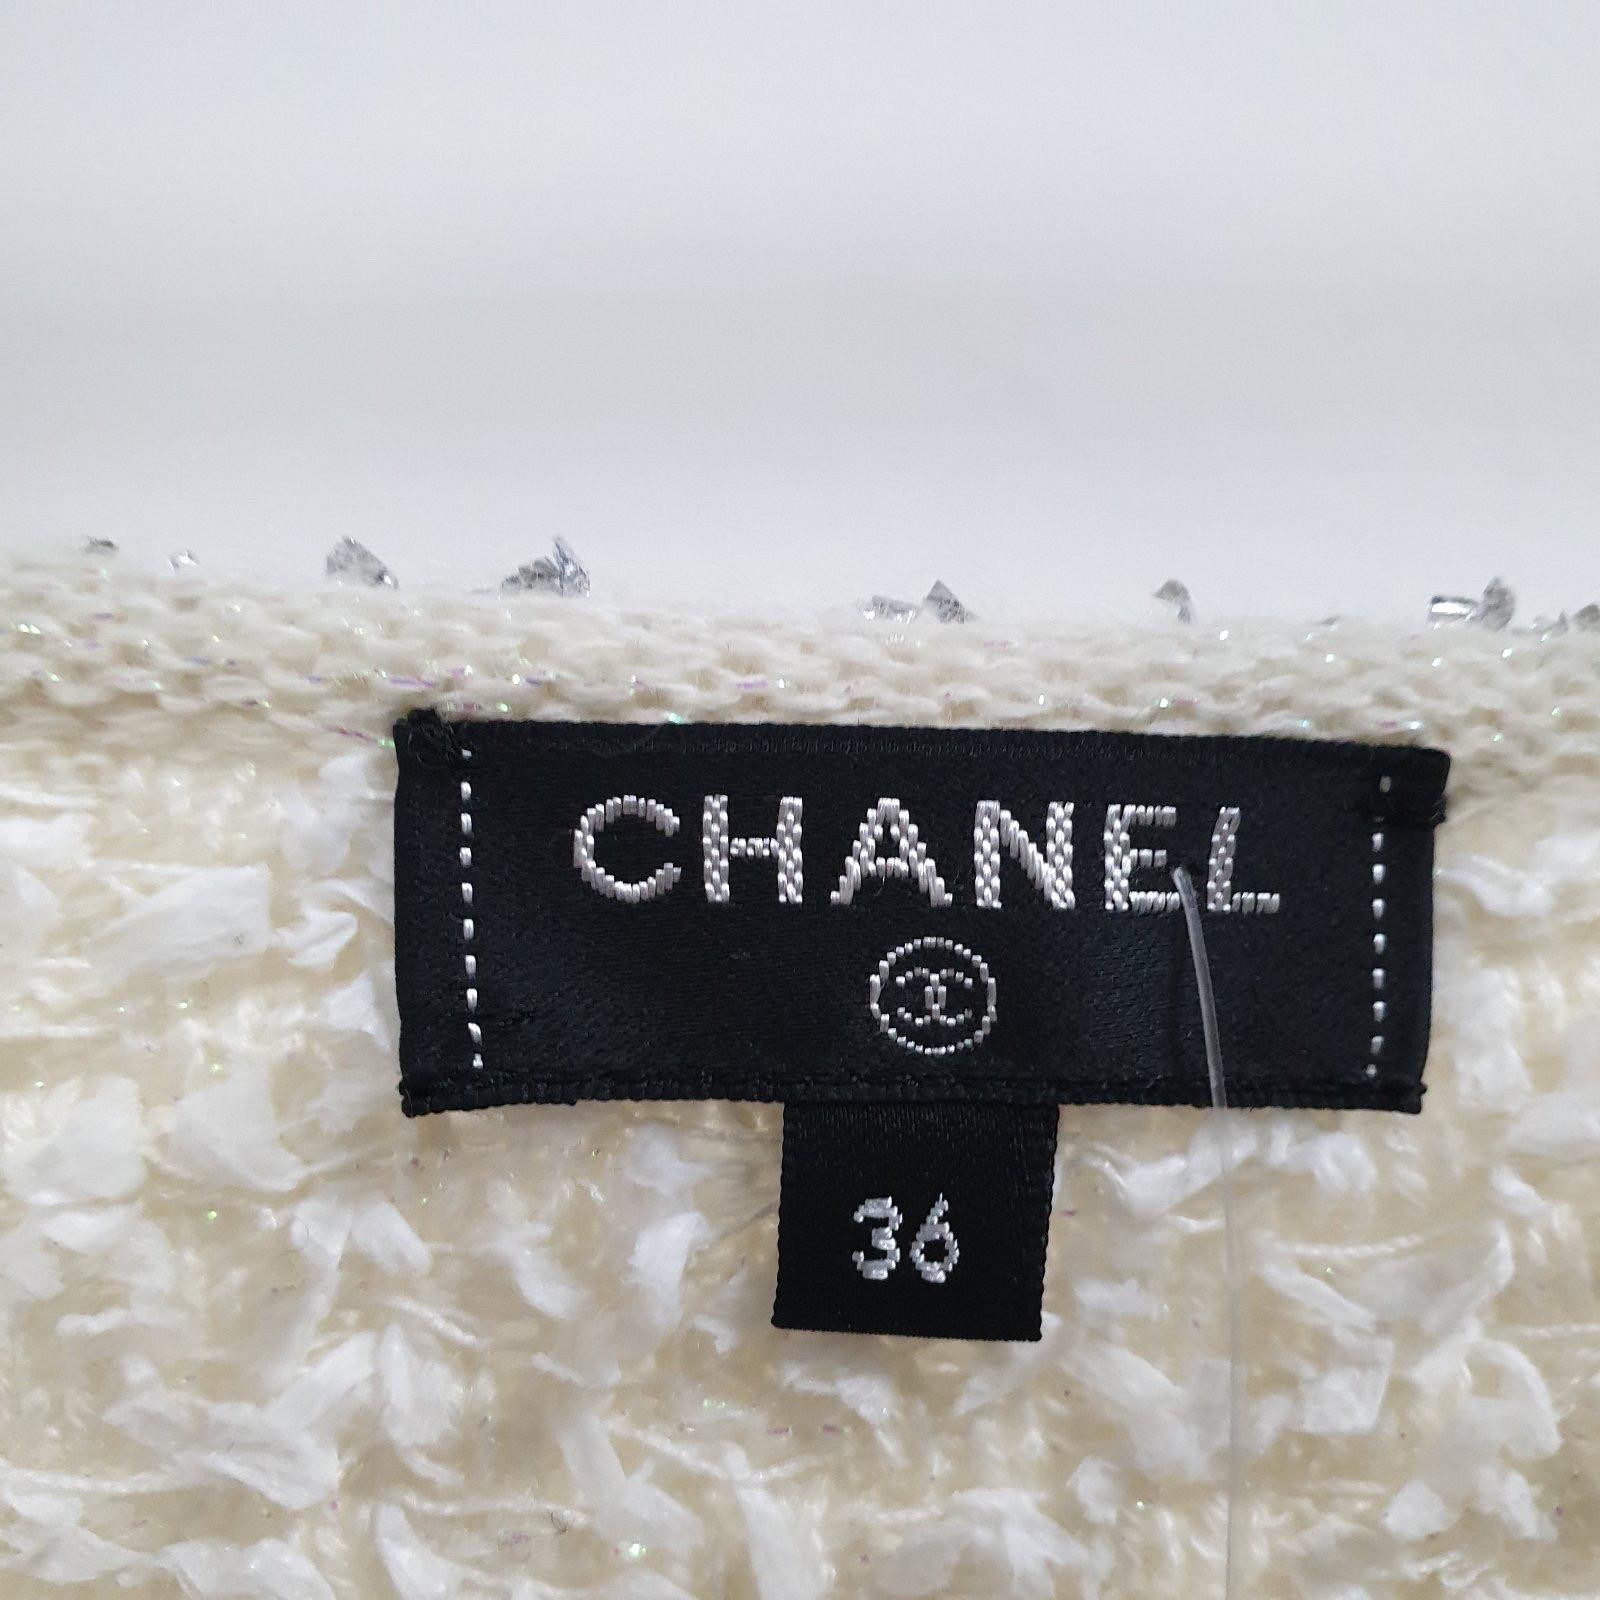 Chanel Asymmetrical Knit Tank top, a runway piece from 2018 Spring-Summer 'Waterfall' collection. An absolutely gorgeous boucle tweed knit in shades of ecru, pink, aqua and silver. As featured on the front cover of the book 